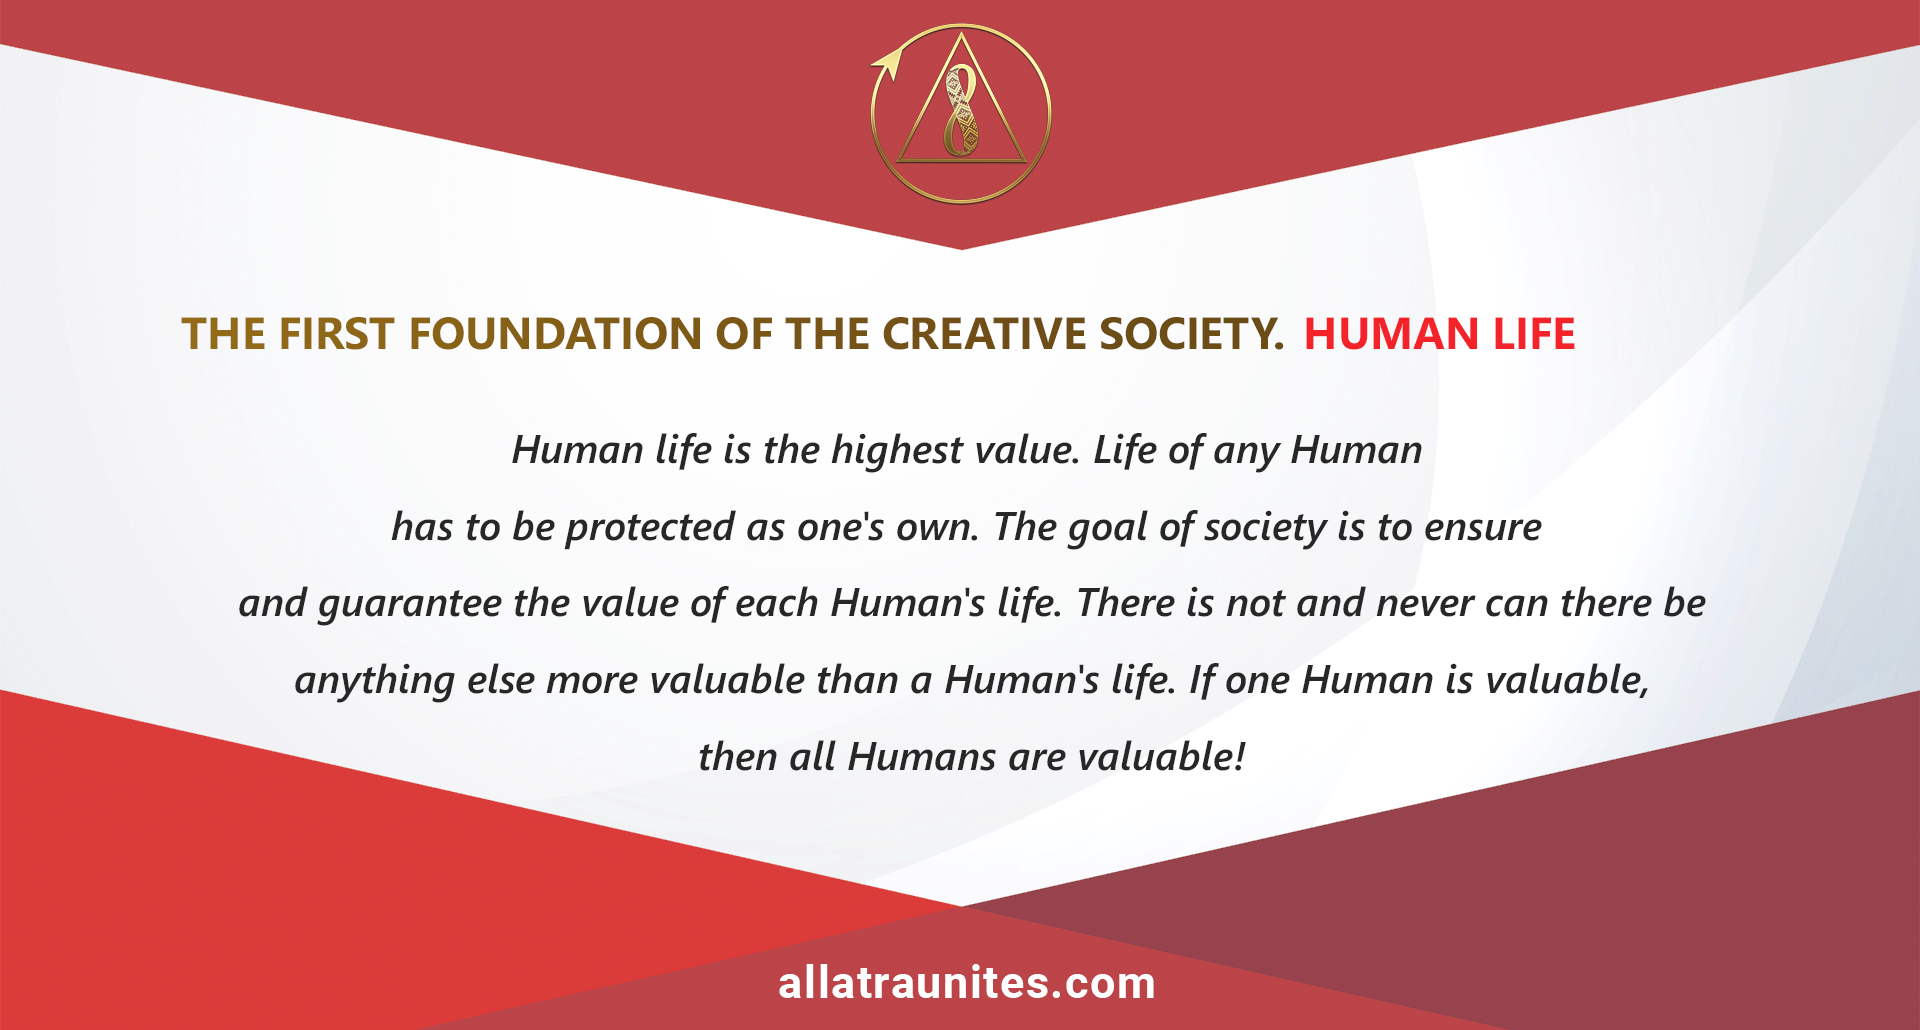 The first foundation of the Creative Society